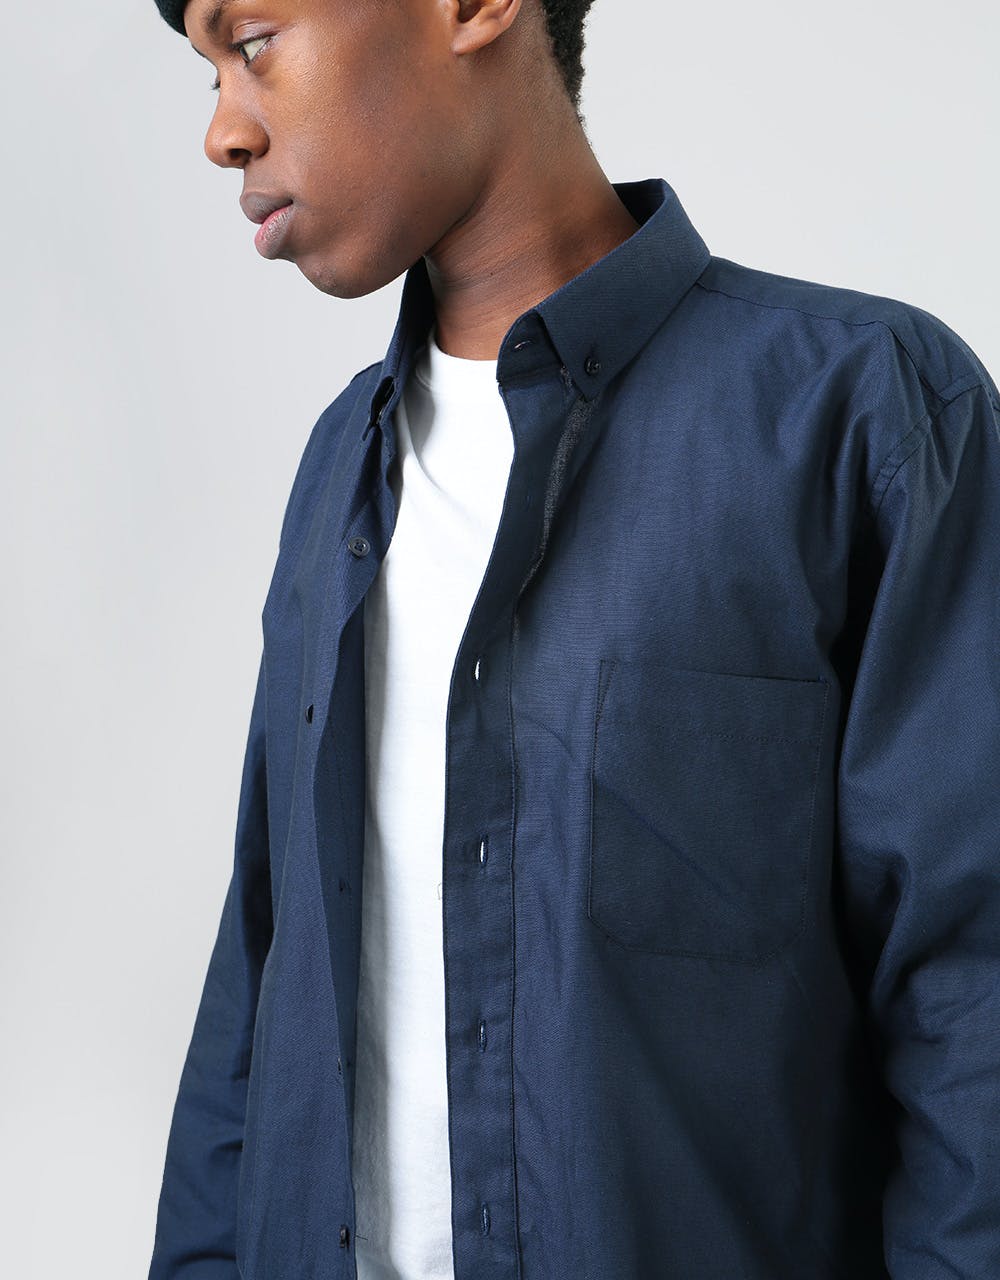 Route One Oxford Shirt - Navy